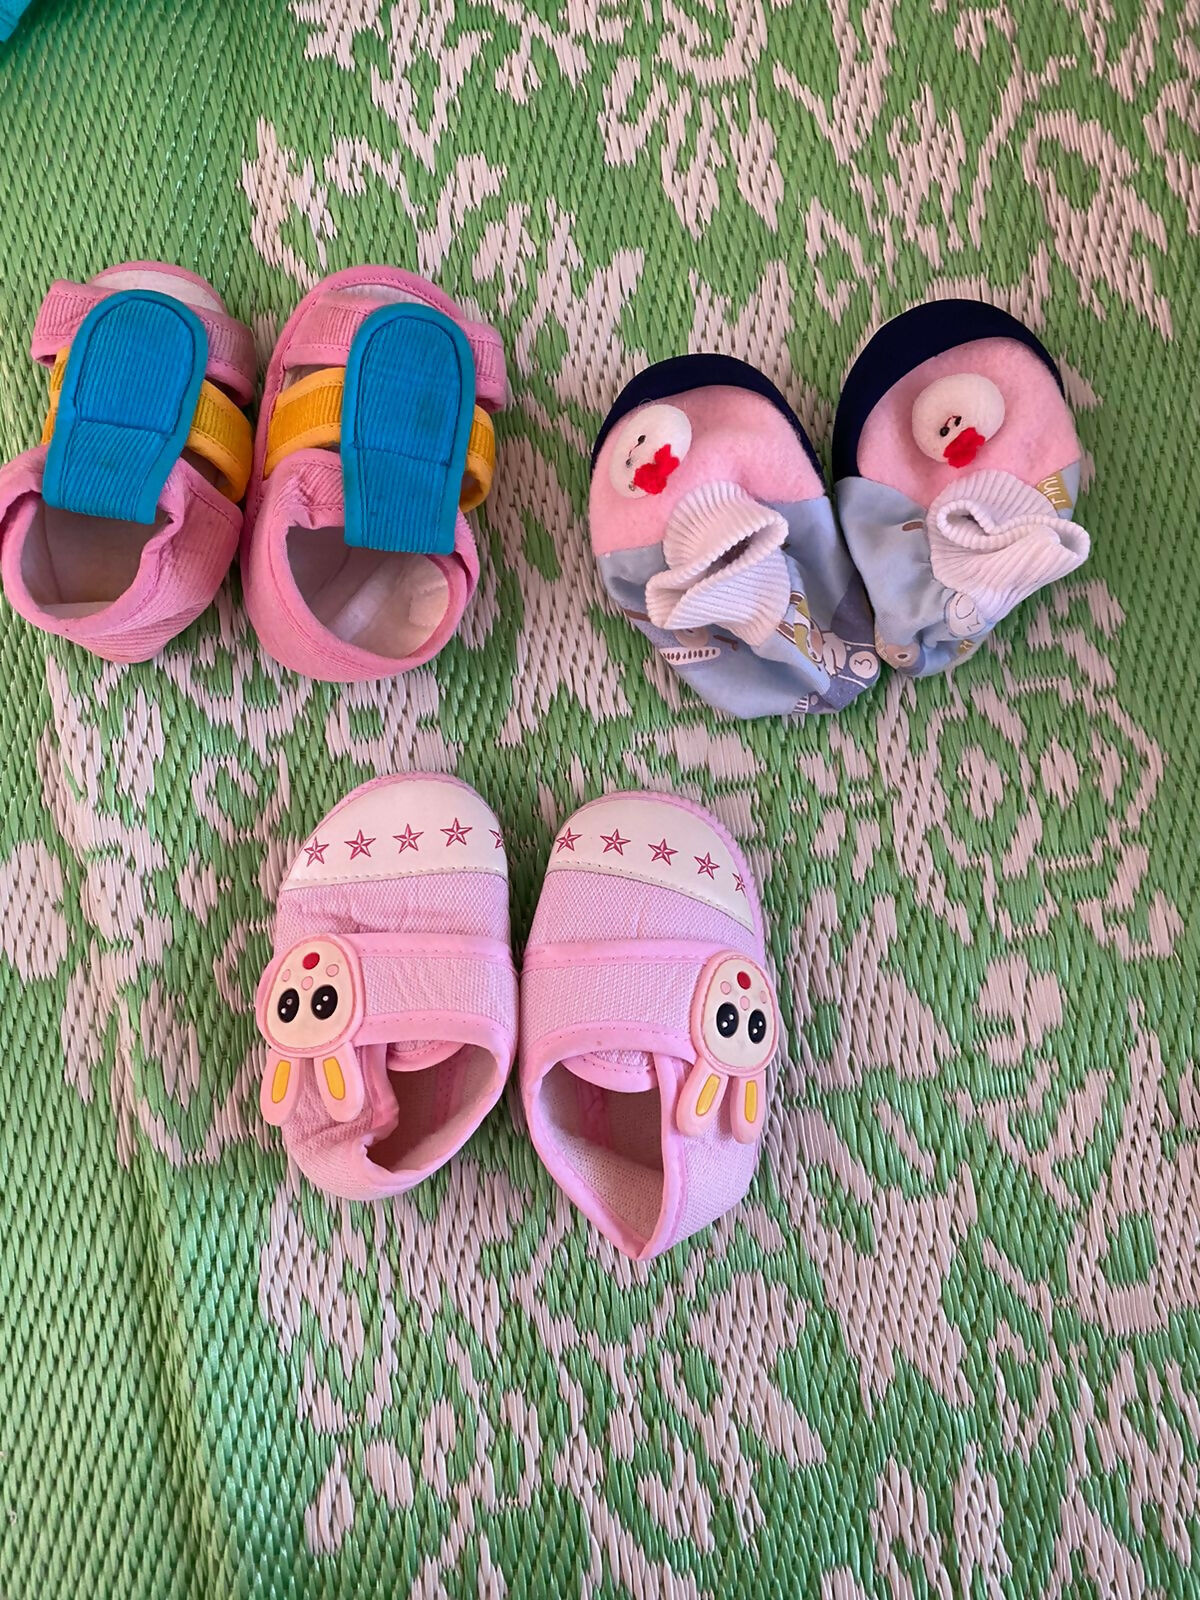 Keep your baby's feet cozy and cute with our Booties for Baby - Set of 3, featuring soft materials and charming designs for everyday wear.